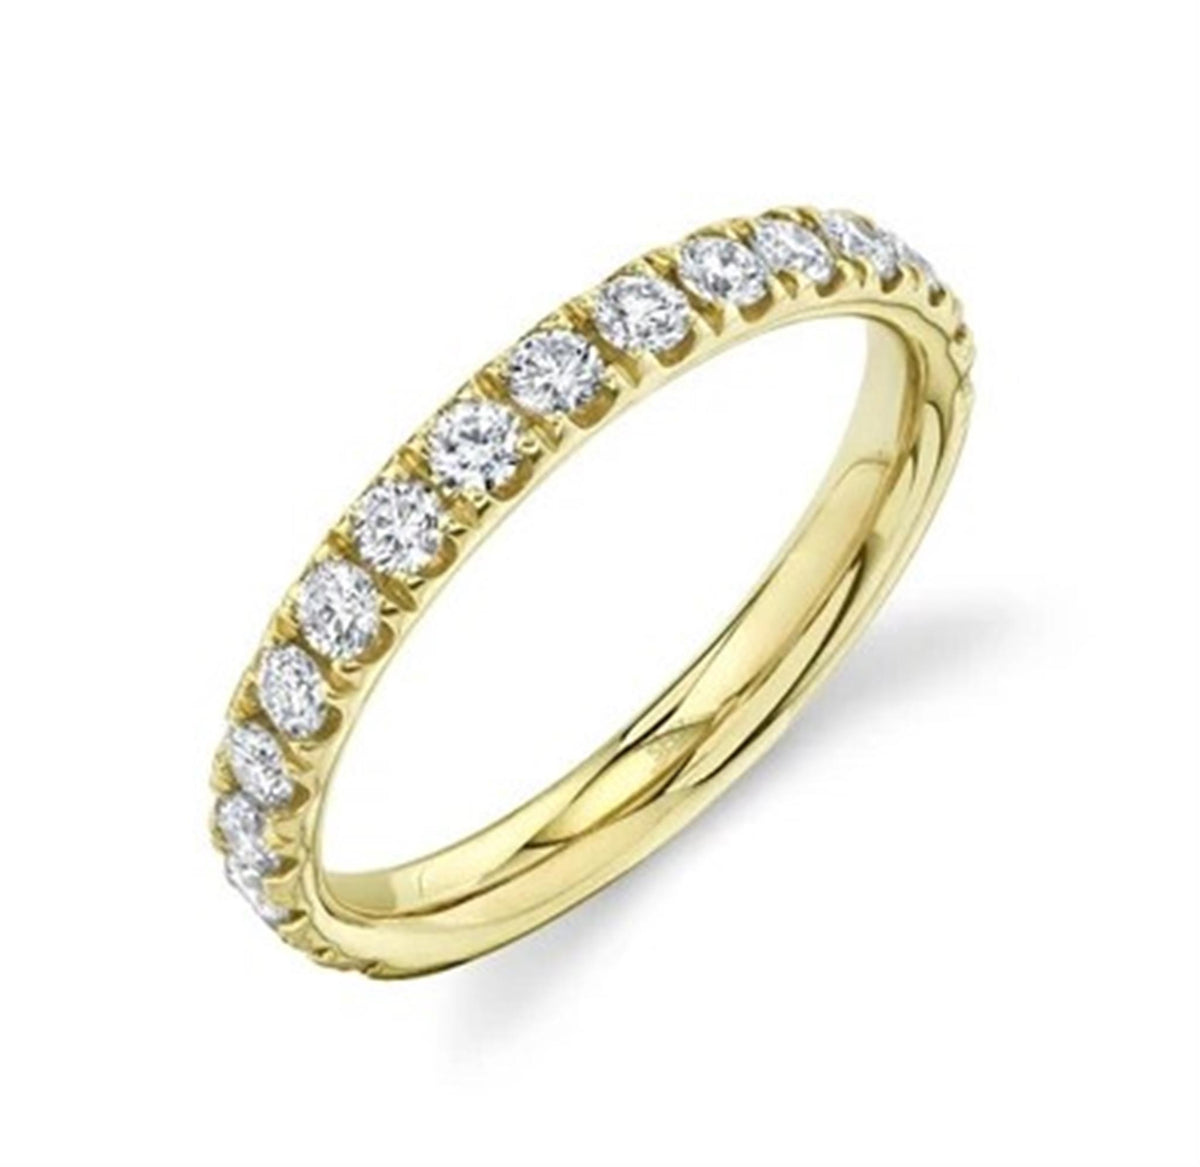 14Kt Yellow Gold Galaxy Ring With 0.73cttw Natural Diamonds